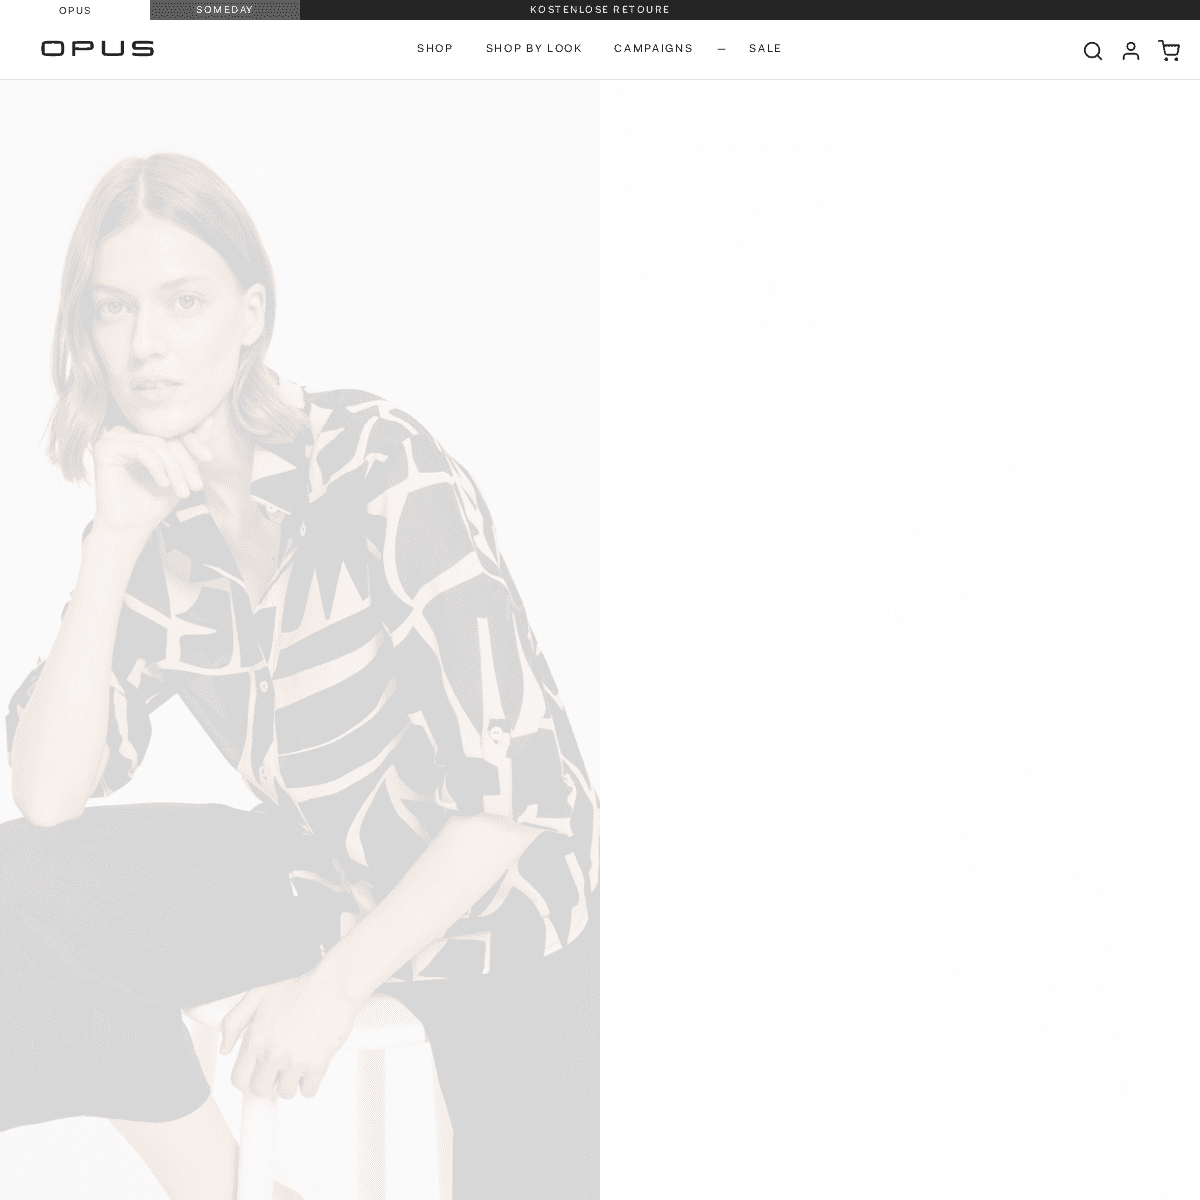 A complete backup of https://casual-fashion.com